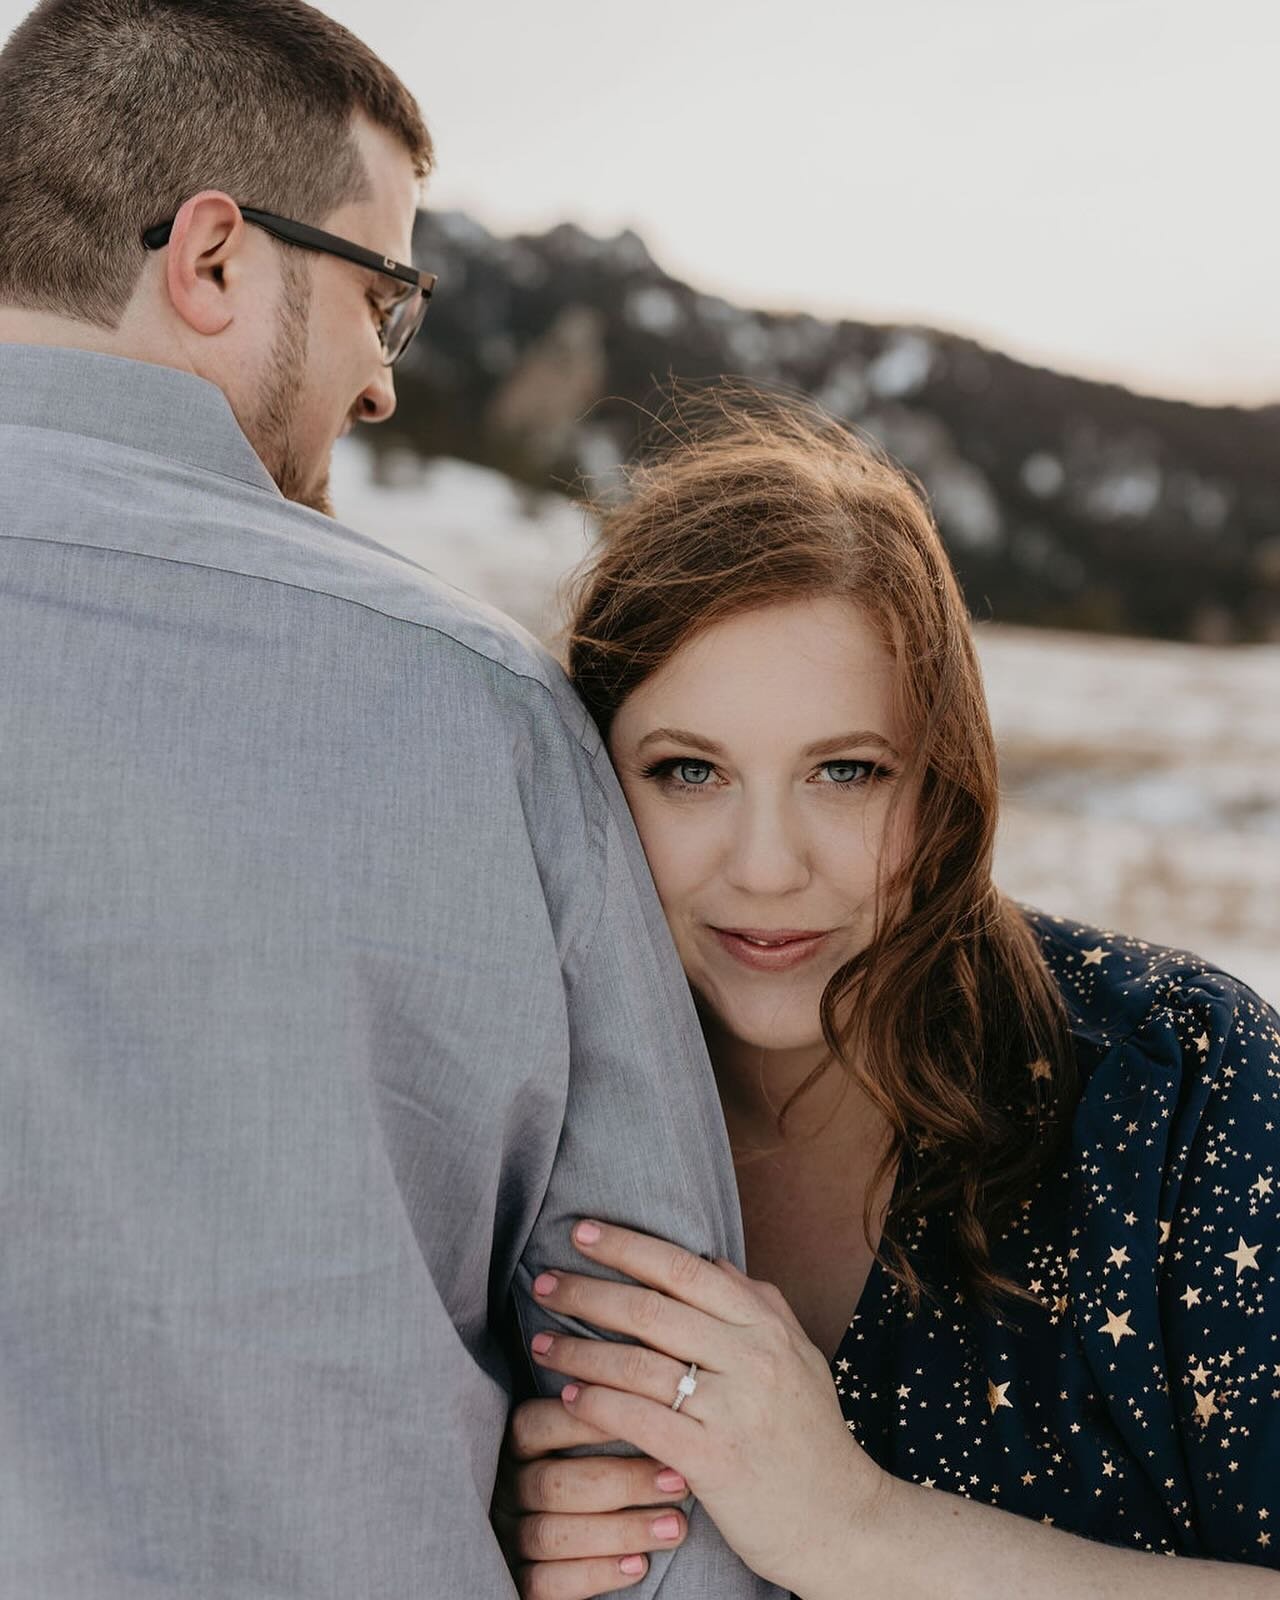 A woman has a special glow about her when she has a ring on her finger ✨
.
Photo: @jessica__cooke 
.
#engagementphotos #engaged #brideandgroom #futuremrandmrs #coloradocouple #azwedding #engagementphotography #azweddingplanner #theweddingtherapist